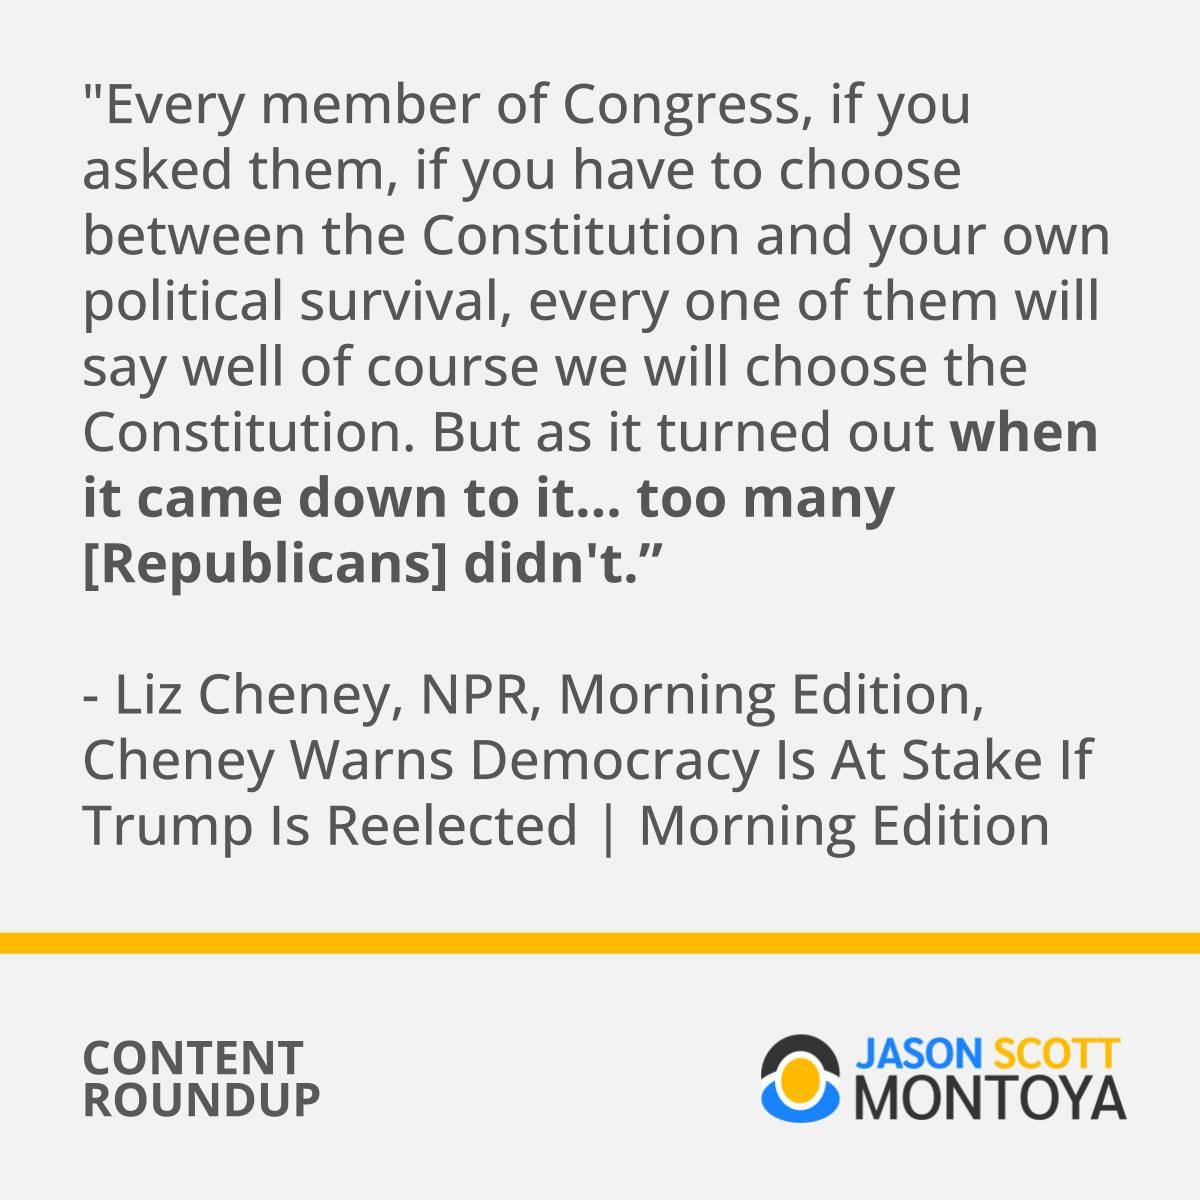 "Every member of Congress, if you asked them, if you have to choose between the Constitution and your own political survival, every one of them will say well of course we will choose the Constitution. But as it turned out when it came down to it... too many [Republicans] didn't.